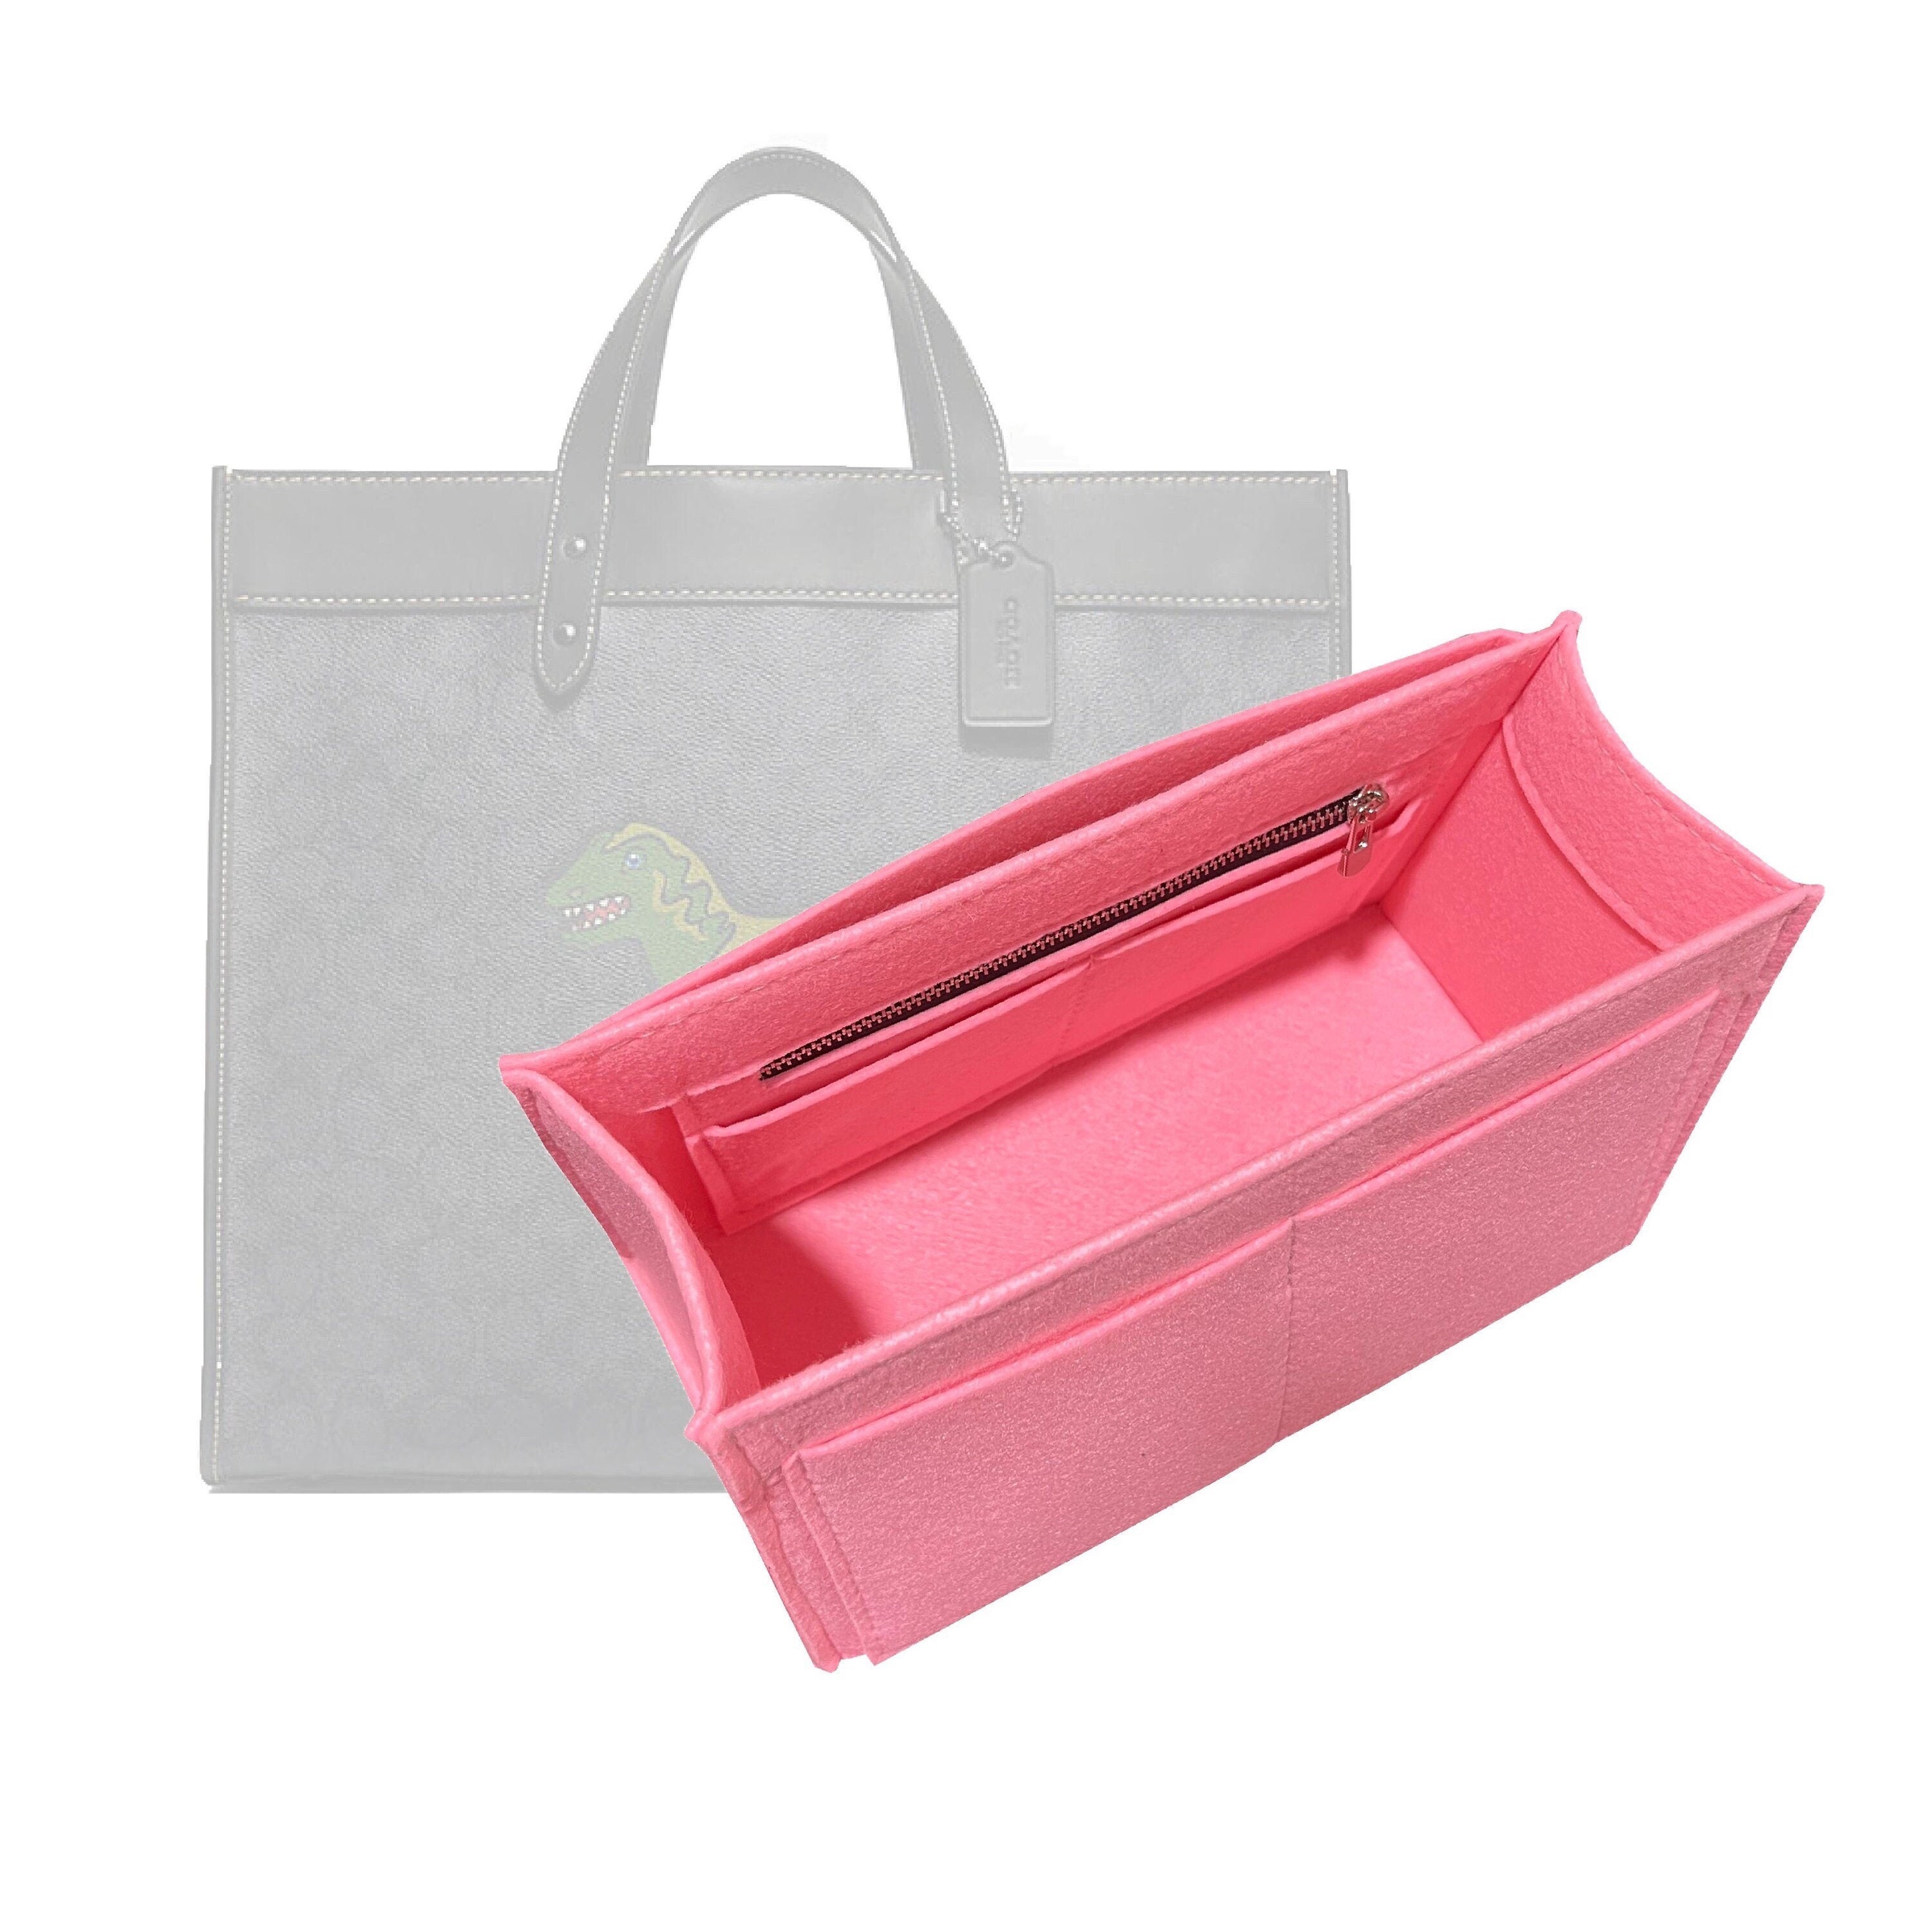  Bag Organizer for Deauville Tote Large (Detachable Zipper Top  Cover) - Premium Felt (Handmade/20 Colors) : Handmade Products